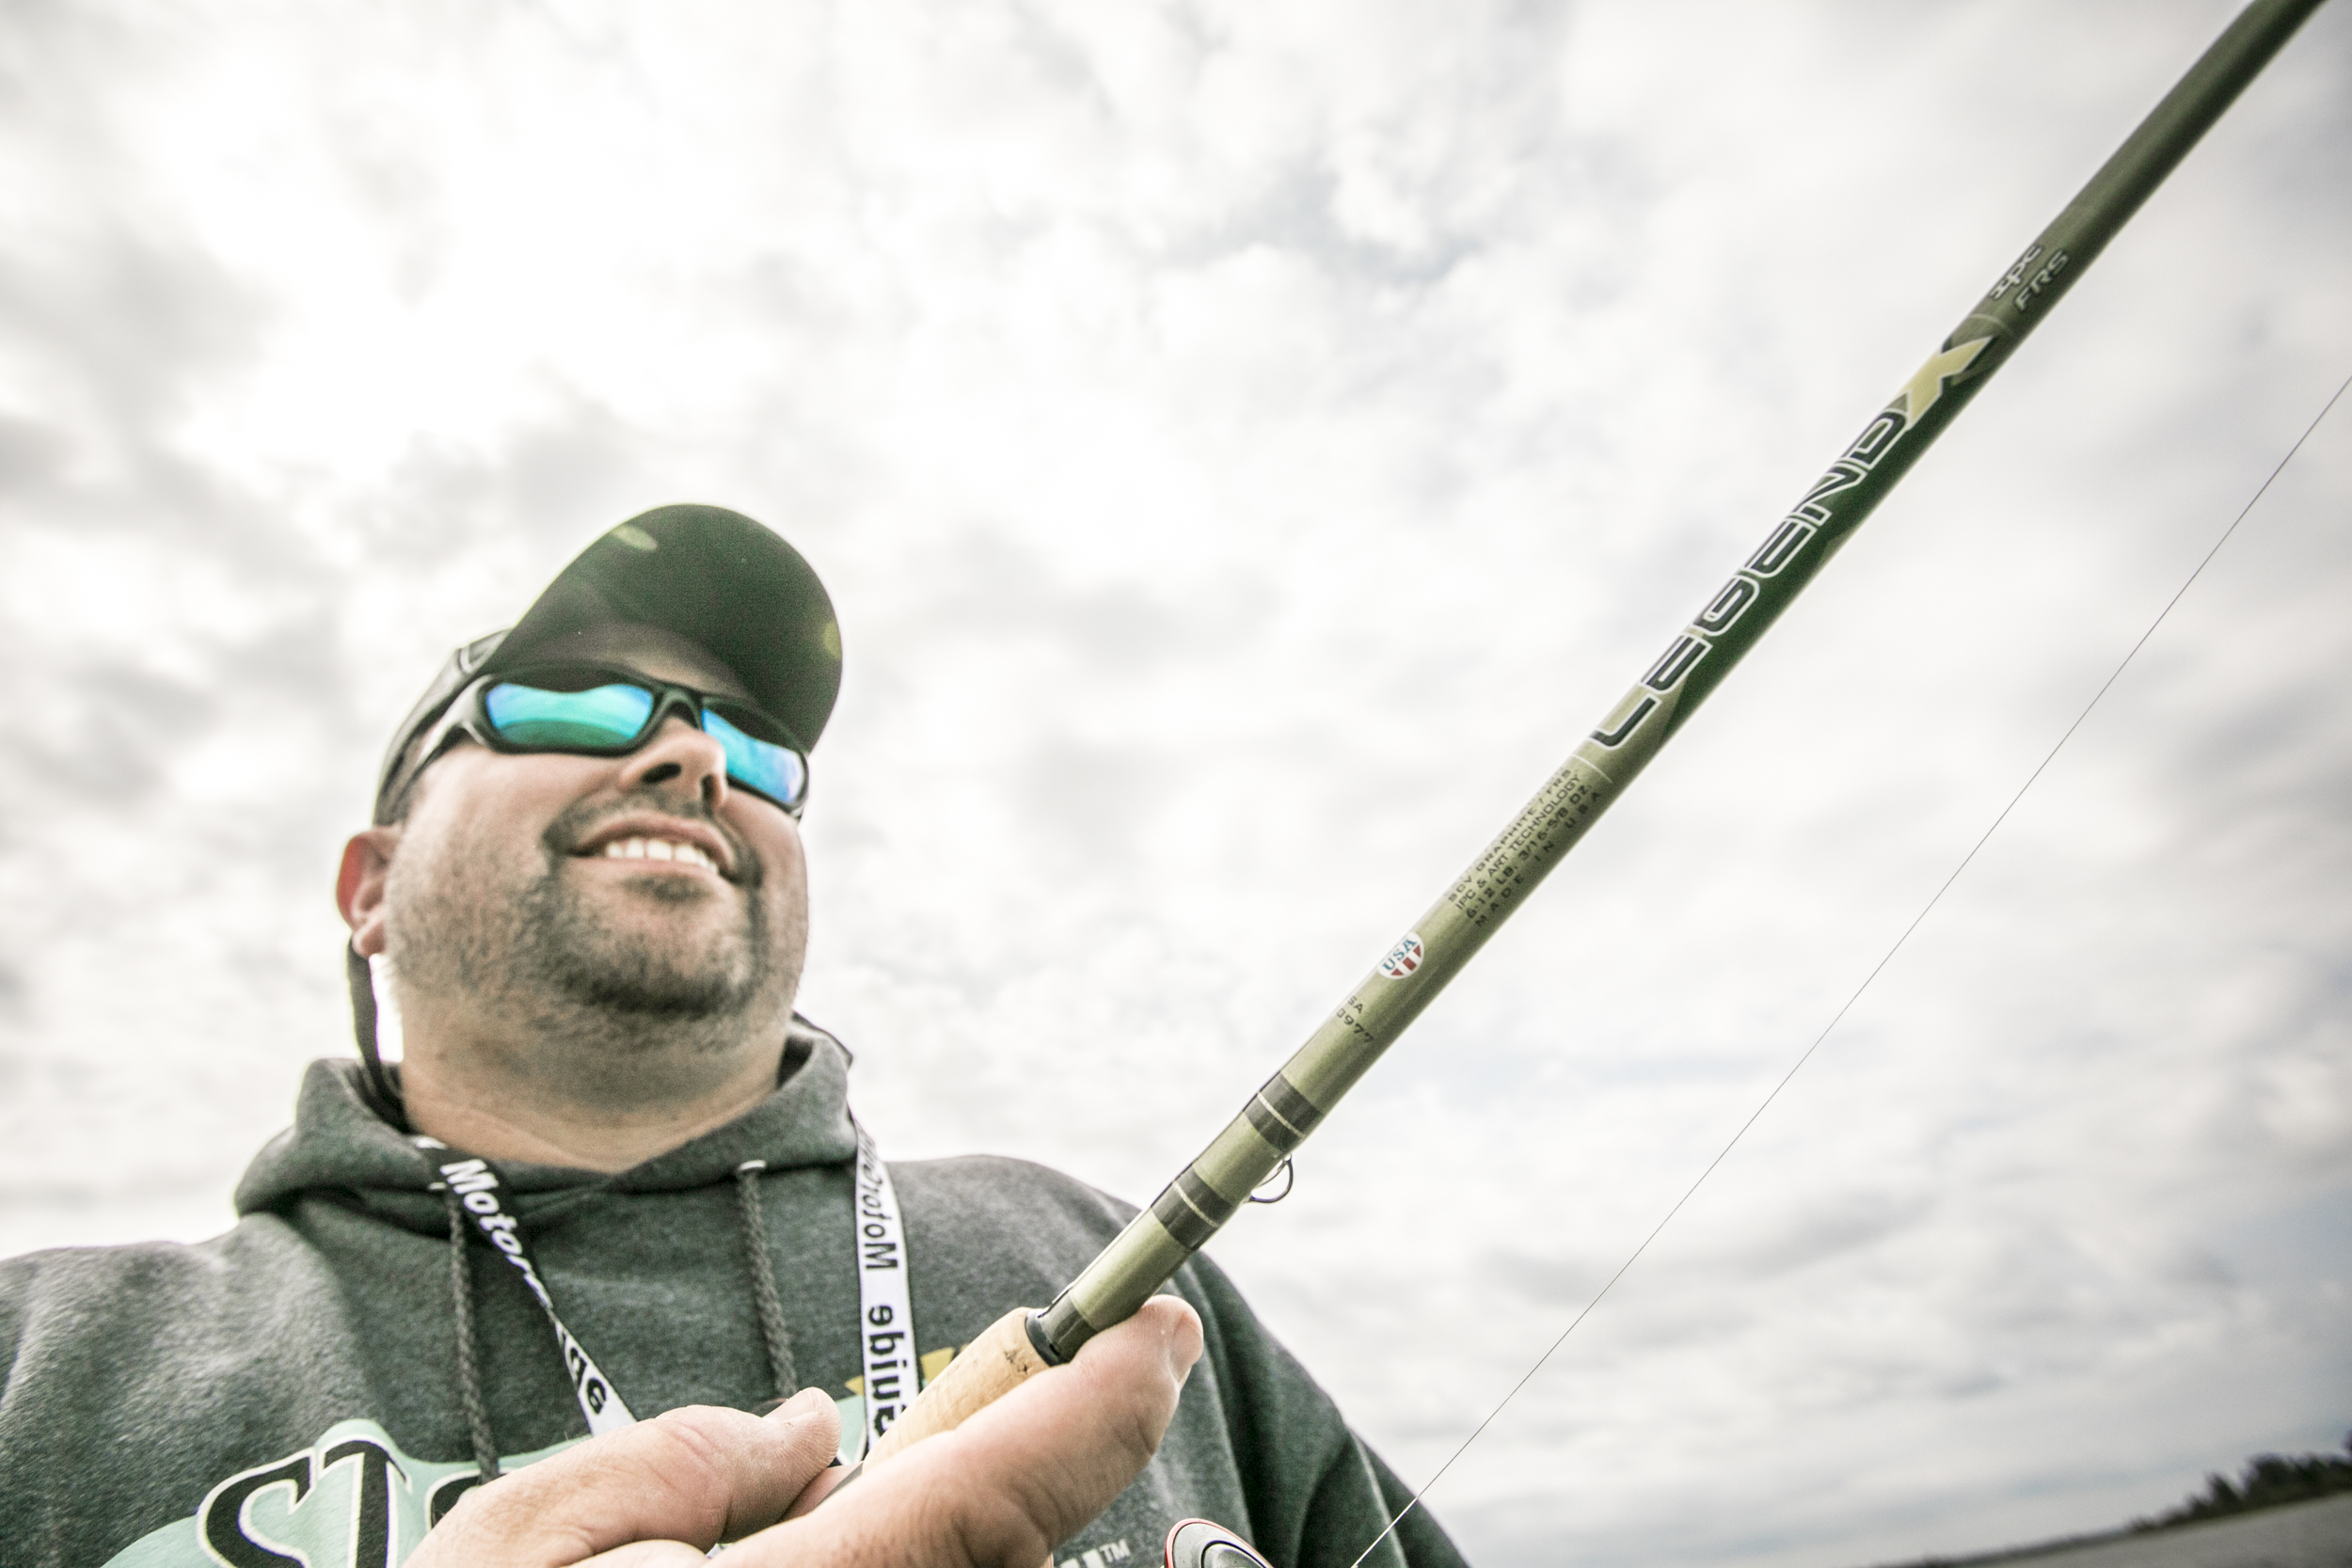 No Rod Lockers: Where do you store your extra rods while fishing